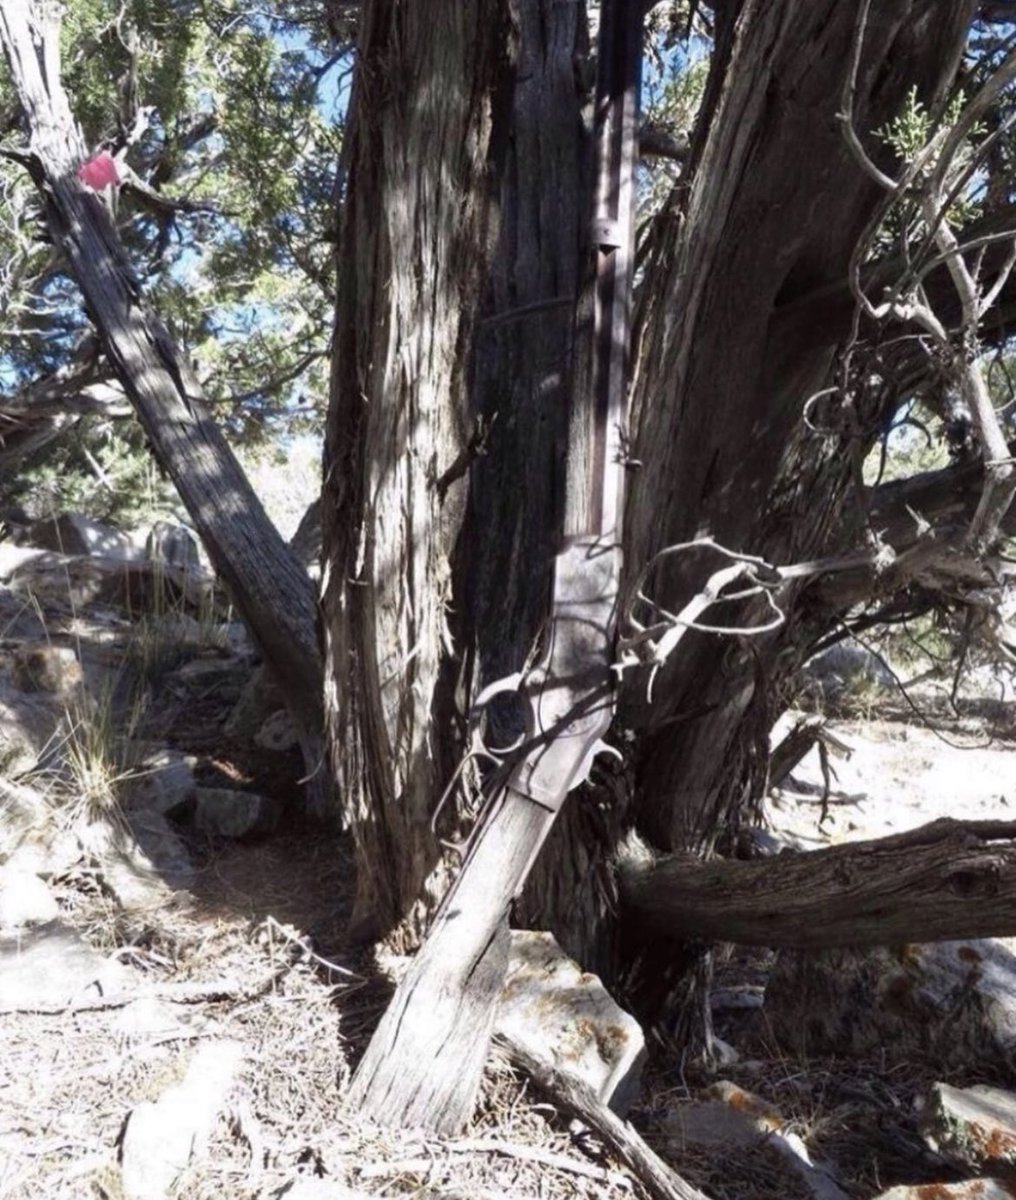 In 2014, a 132-year-old rifle was discovered leaning against a tree in a remote part of the Nevada desert by pure chance. Archaeologist Eva Jansen led a team on an expedition to search for artifacts in the Nevada hillside within Great Basin Park when they stumbled upon the rifle.…